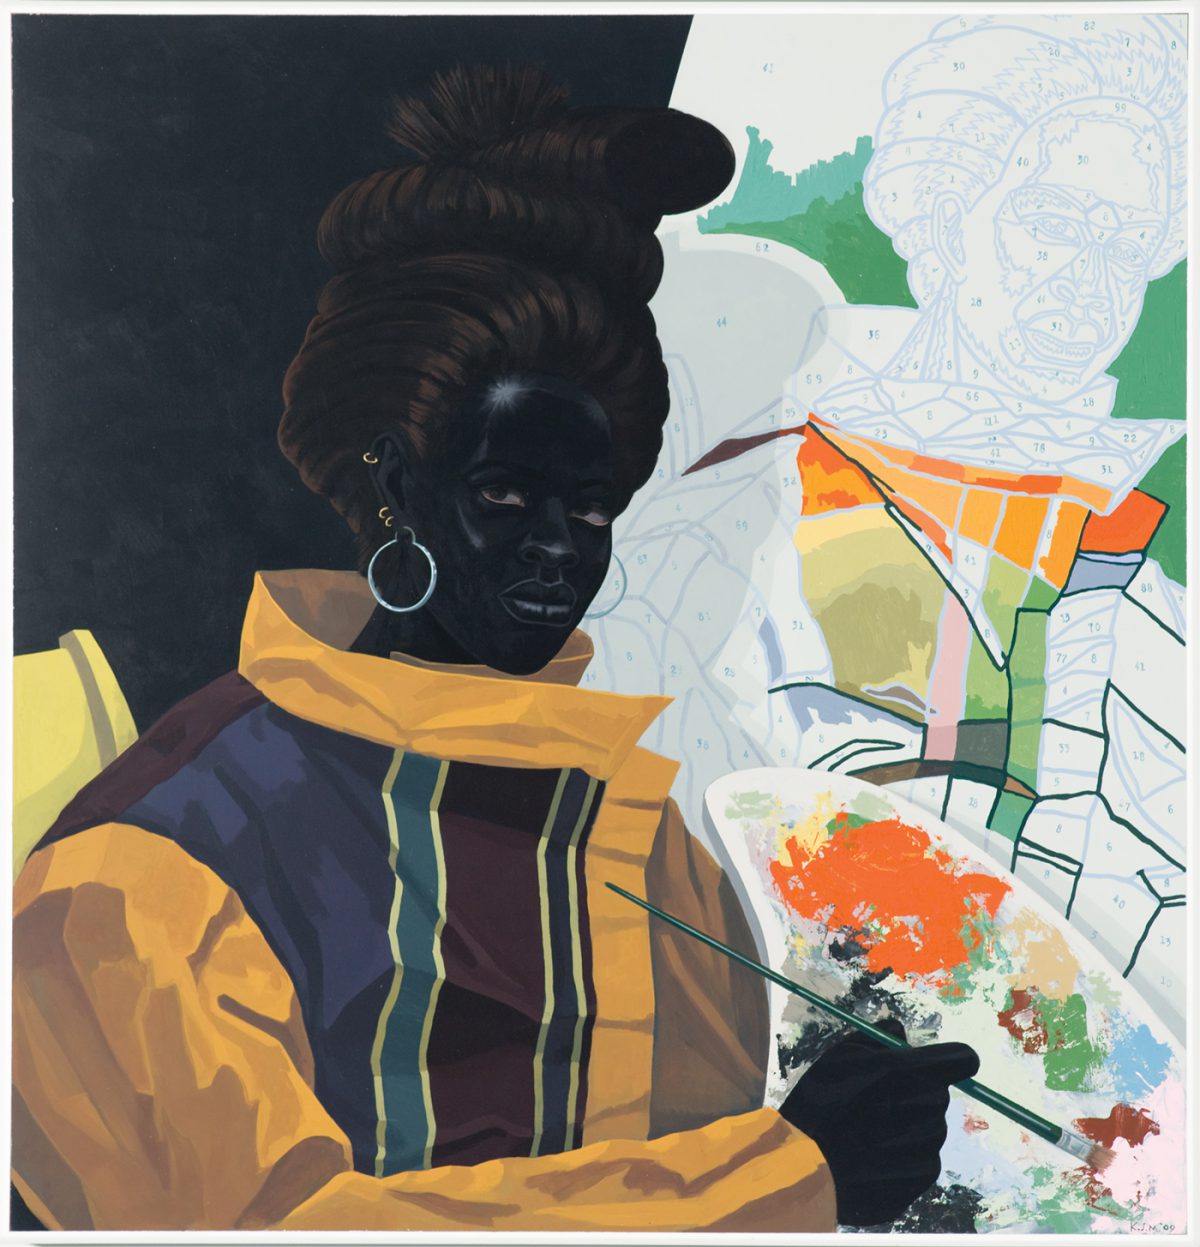 Kerry James Marshall, Untitled (Painter), 2009. Acrylic on PVC, 44 5/8 x 43 1/8 x 3 7/8 in., collection of the Museum of Contemporary Art Chicago, gift of Katherine S. Schamberg by exchange, photo by Nathan Keay, © MCA Chicago.